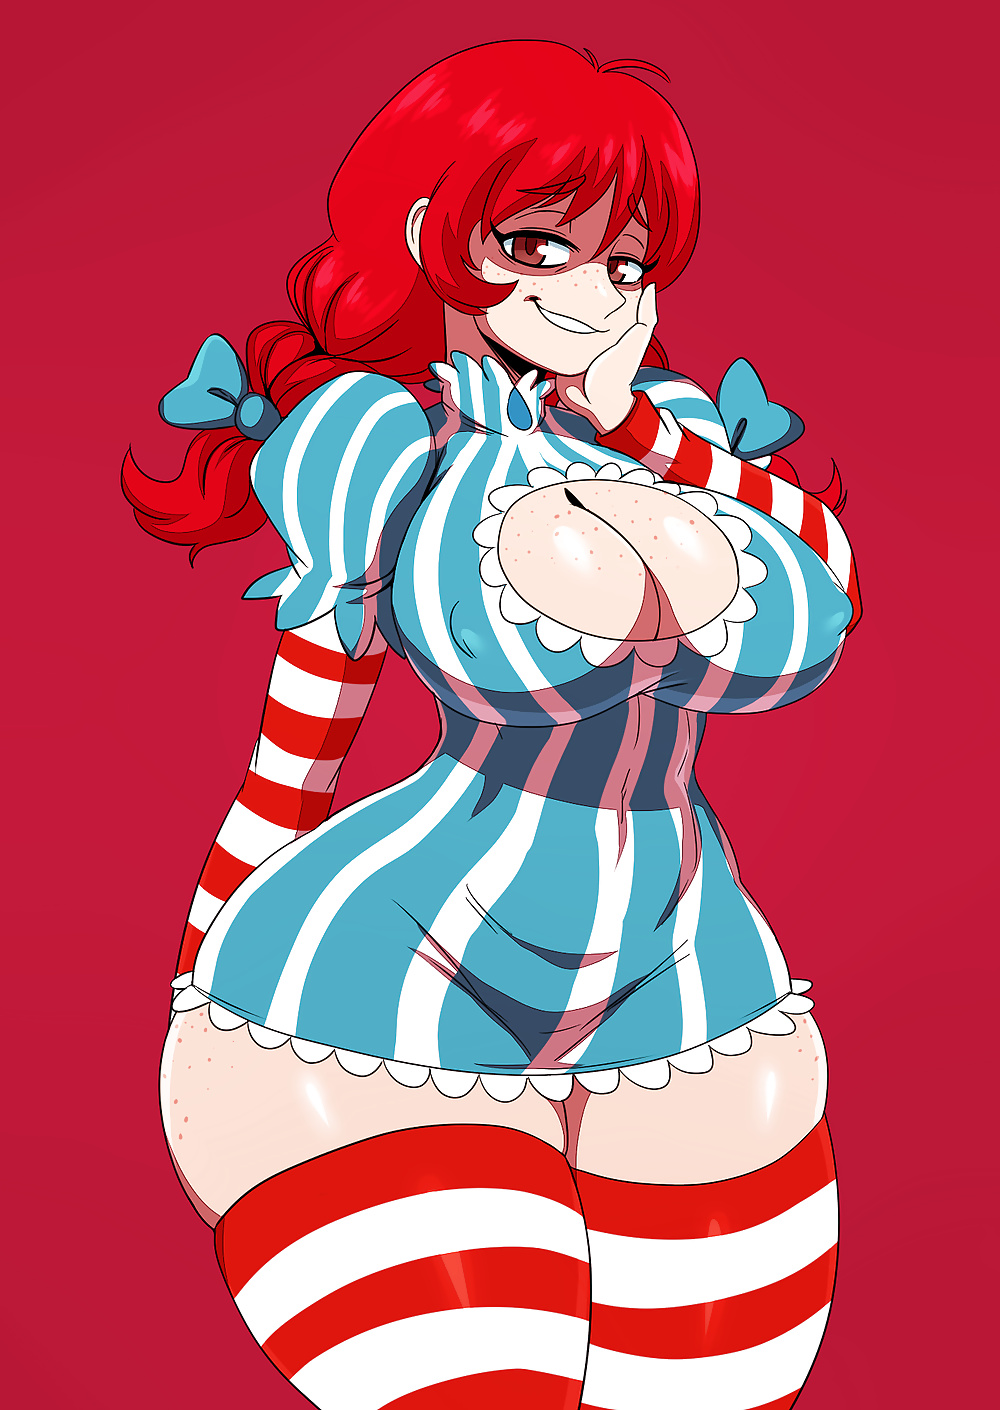 I could go for some Wendy s - Photo #23.